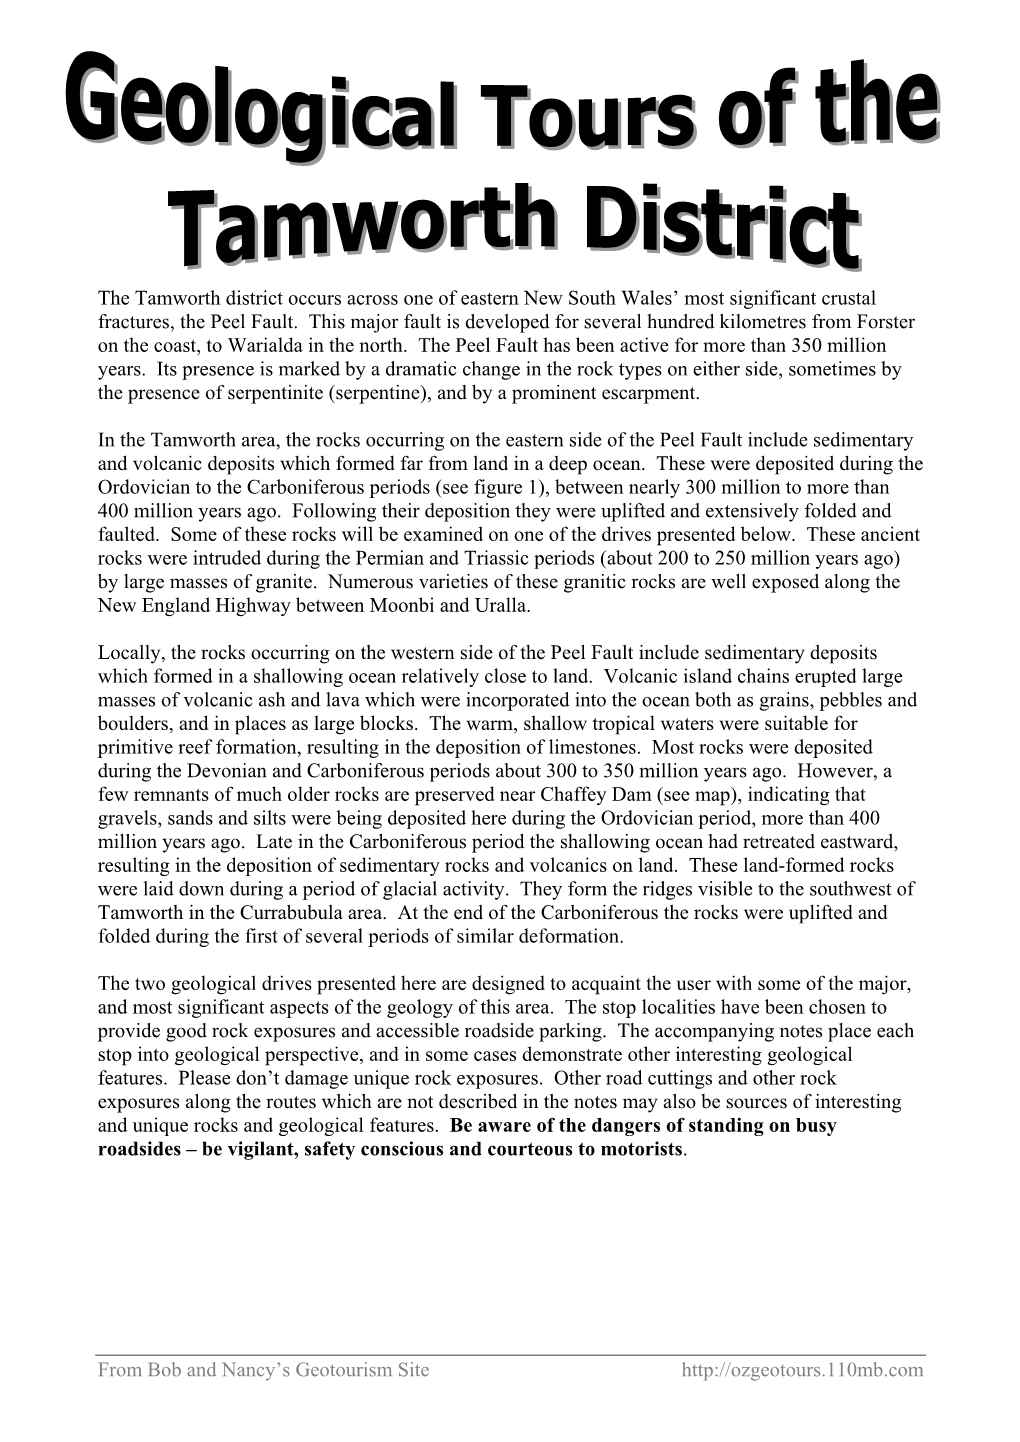 From Bob and Nancy's Geotourism Site the Tamworth District Occurs Across One of Eastern New South